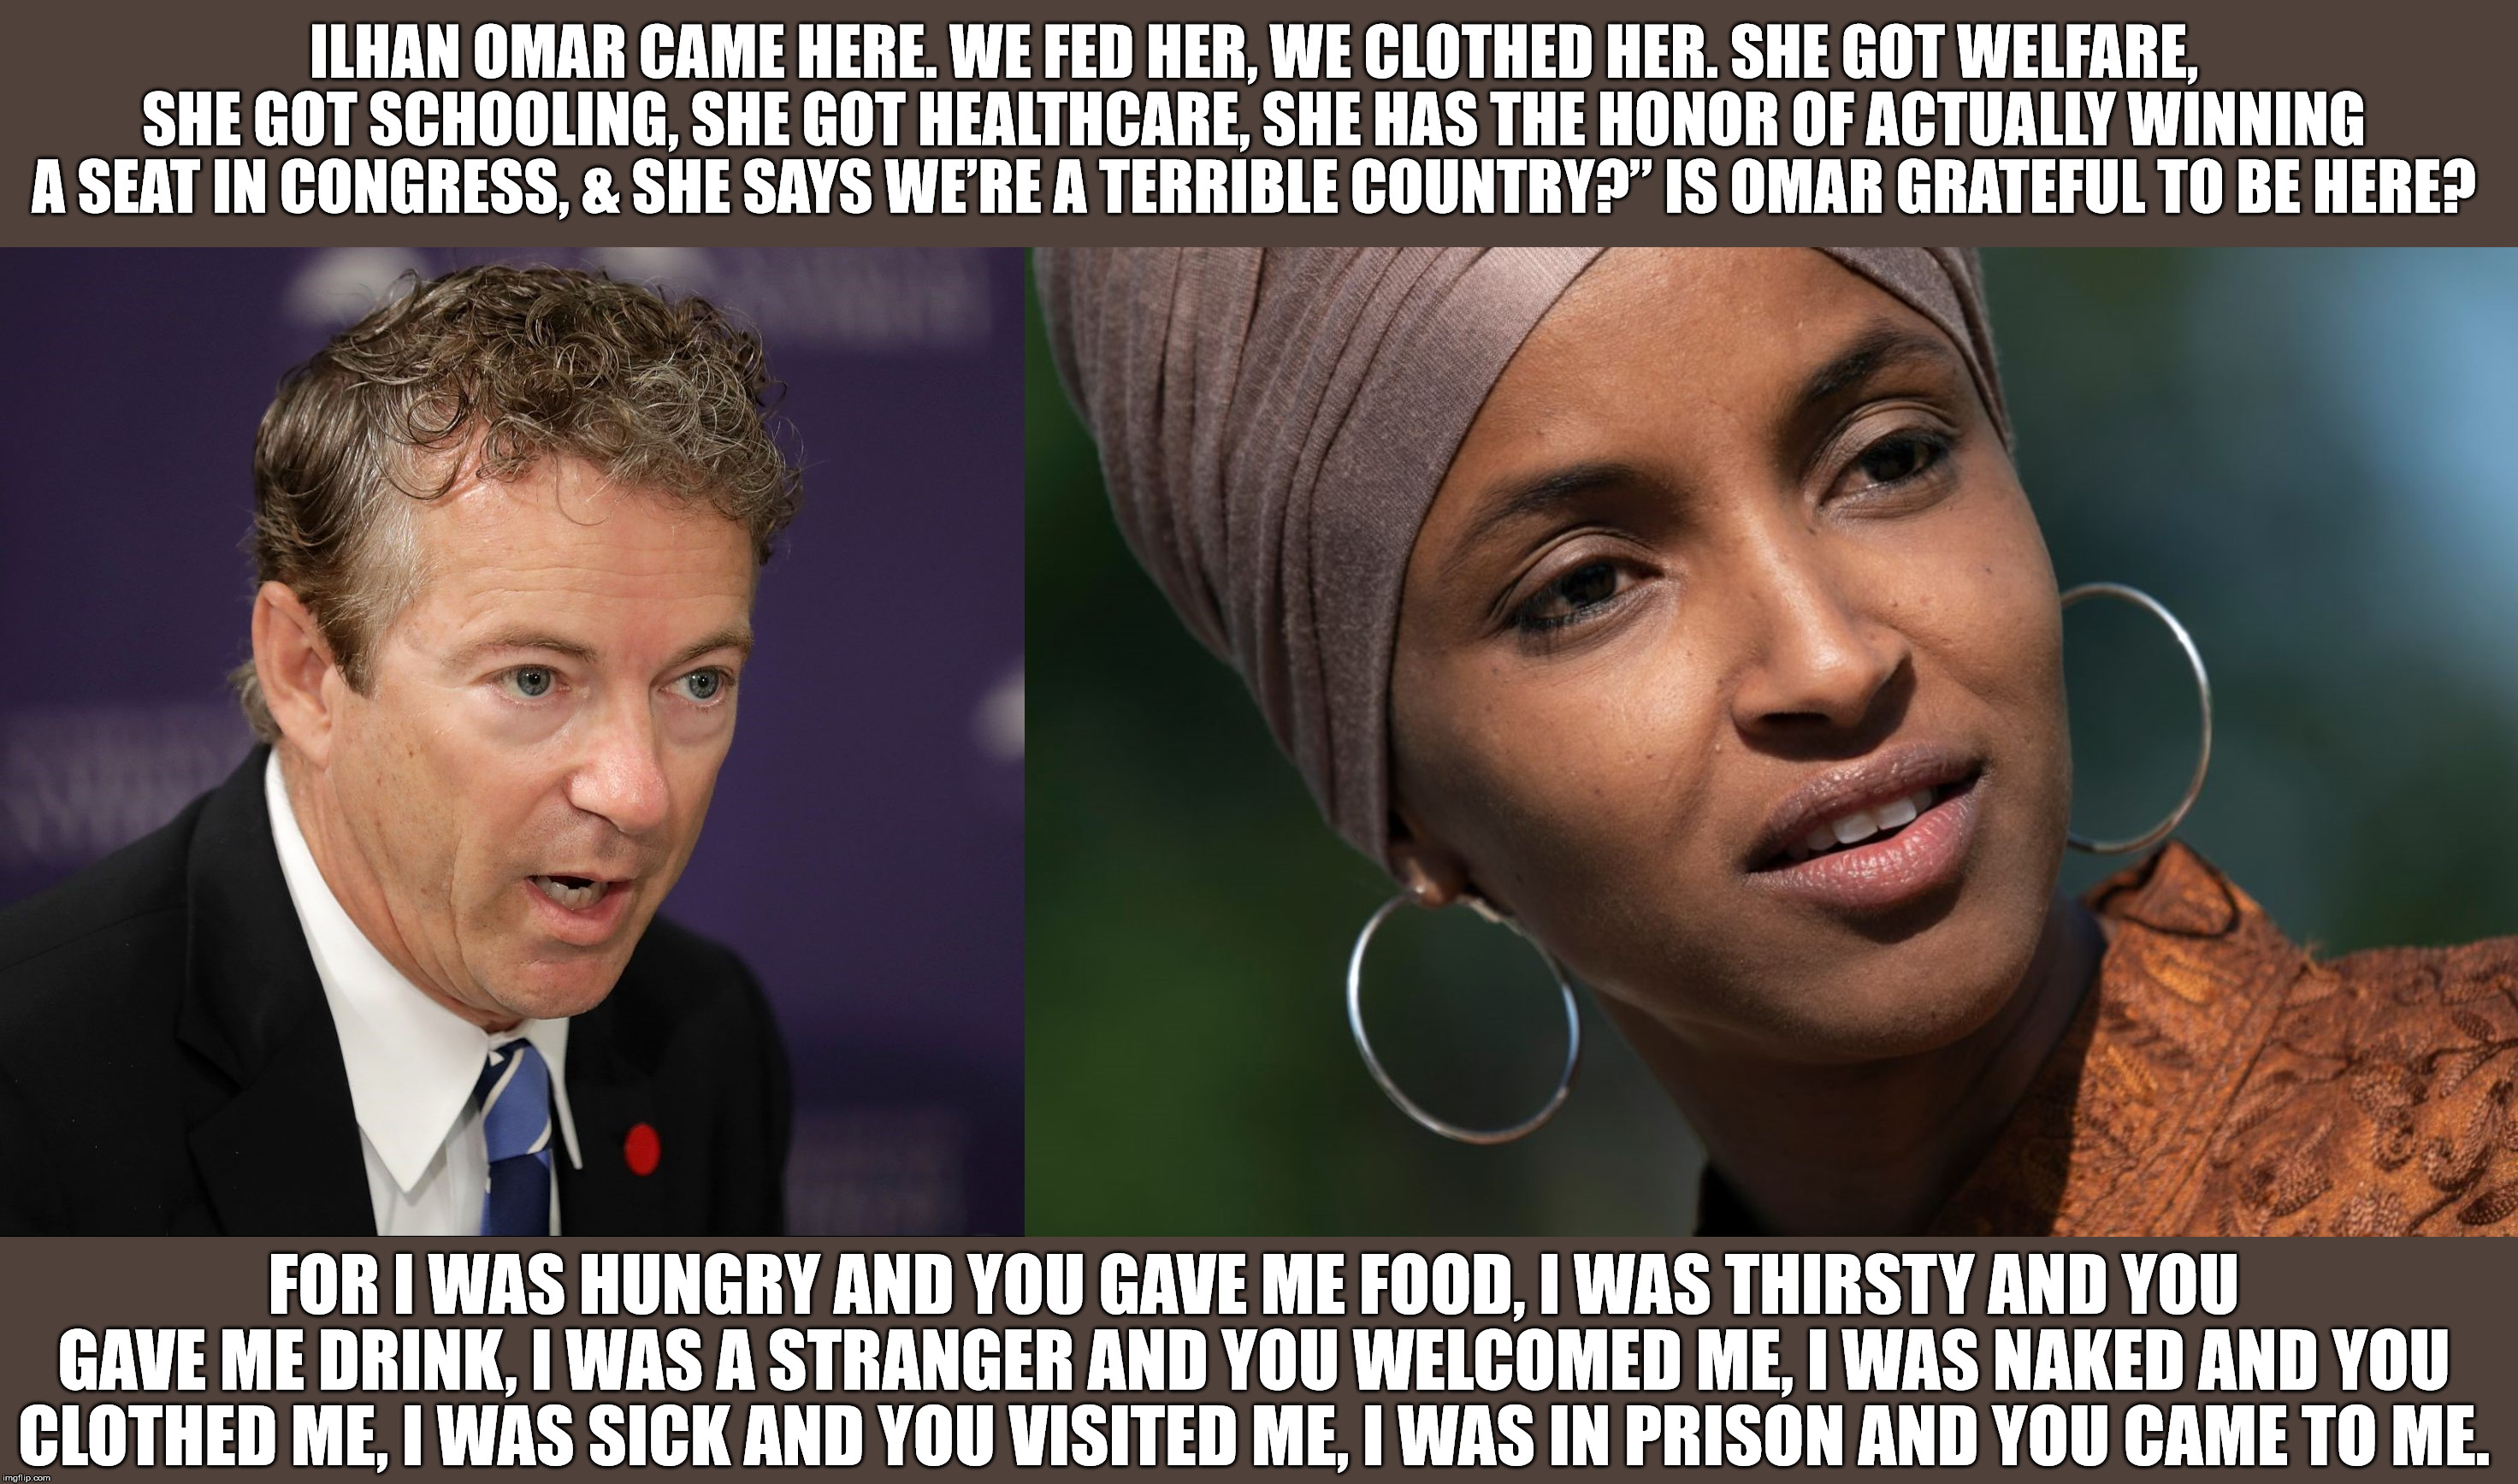 Some food for thought for the political and religious. |  ILHAN OMAR CAME HERE. WE FED HER, WE CLOTHED HER. SHE GOT WELFARE, SHE GOT SCHOOLING, SHE GOT HEALTHCARE, SHE HAS THE HONOR OF ACTUALLY WINNING A SEAT IN CONGRESS, & SHE SAYS WE’RE A TERRIBLE COUNTRY?” IS OMAR GRATEFUL TO BE HERE? FOR I WAS HUNGRY AND YOU GAVE ME FOOD, I WAS THIRSTY AND YOU GAVE ME DRINK, I WAS A STRANGER AND YOU WELCOMED ME, I WAS NAKED AND YOU CLOTHED ME, I WAS SICK AND YOU VISITED ME, I WAS IN PRISON AND YOU CAME TO ME. | image tagged in rand paul,ilhan omar,jesus christ,welfare,politics,religious | made w/ Imgflip meme maker